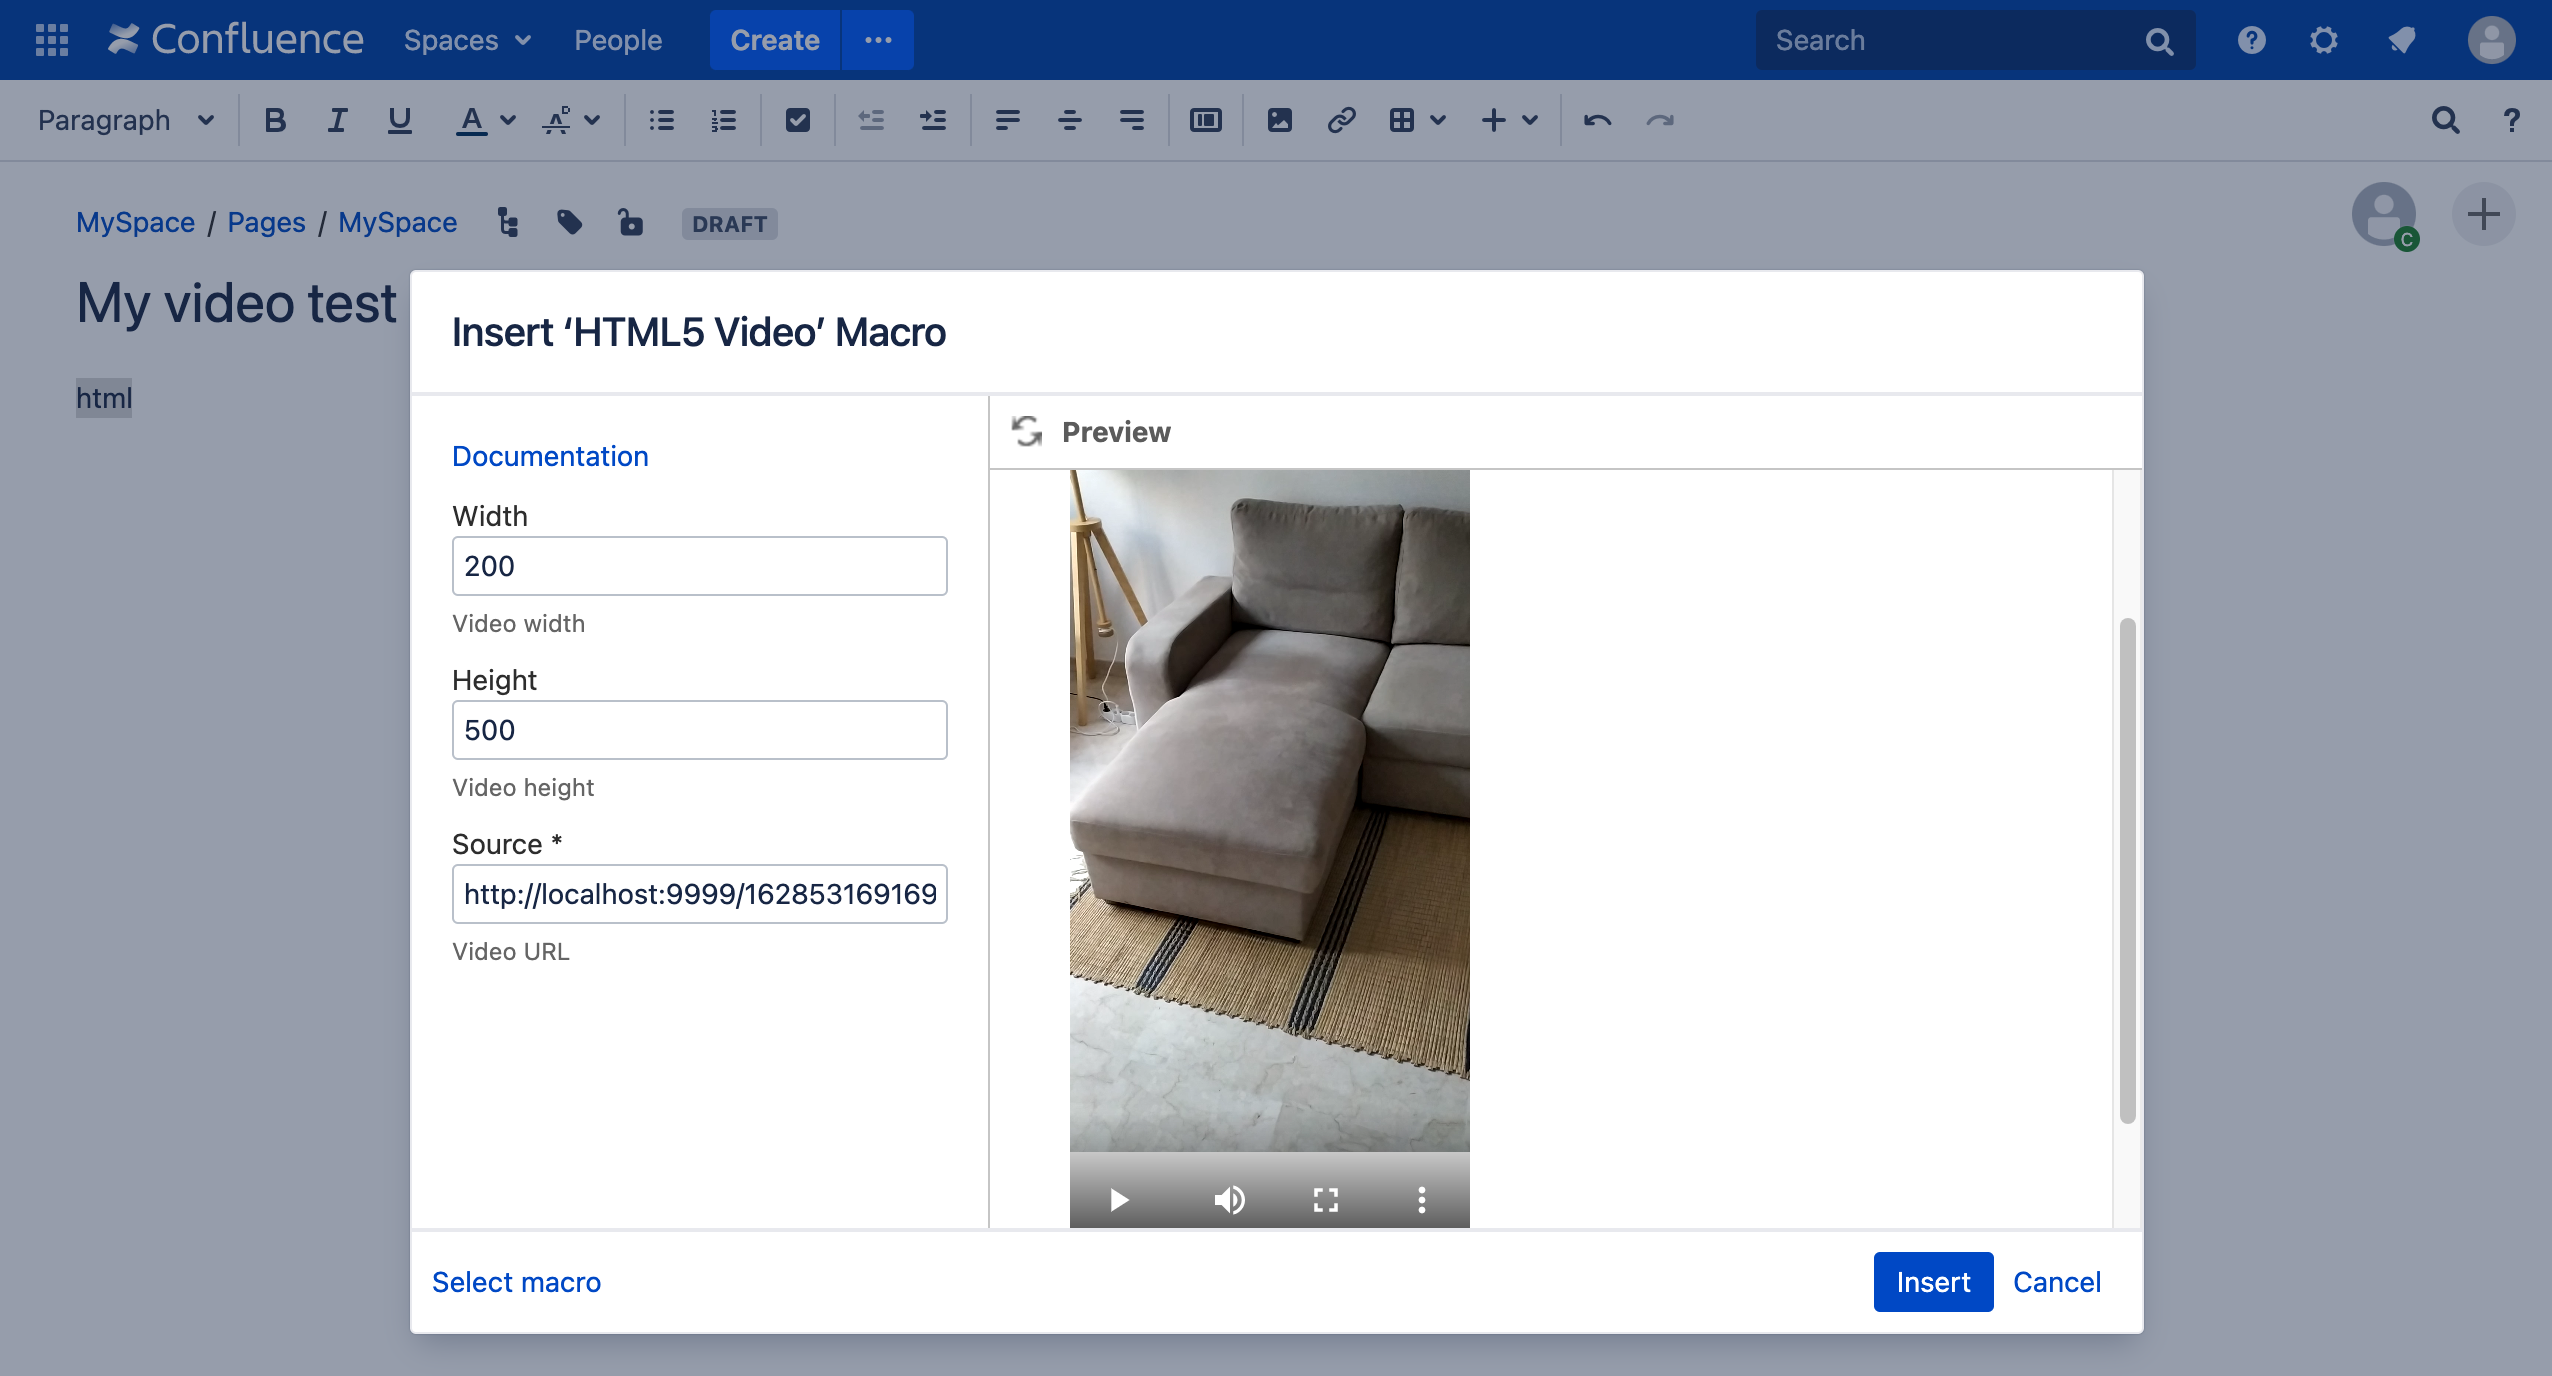 All the ways to serve videos from Confluence Data Center 2